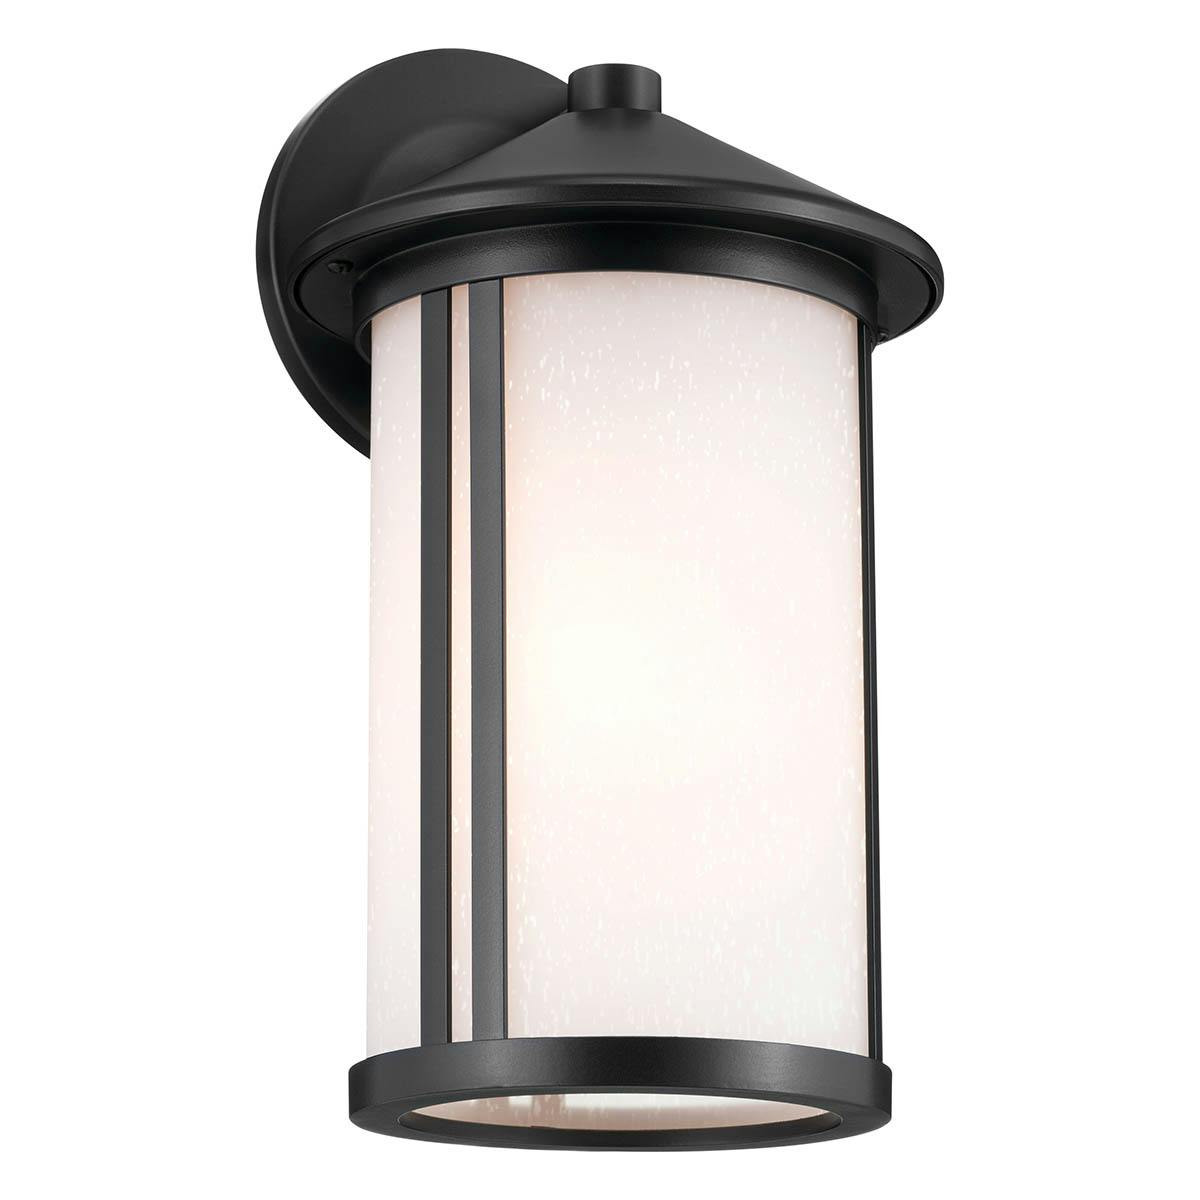 Lombard 12.7" 1 Light Wall Light Black on a white background